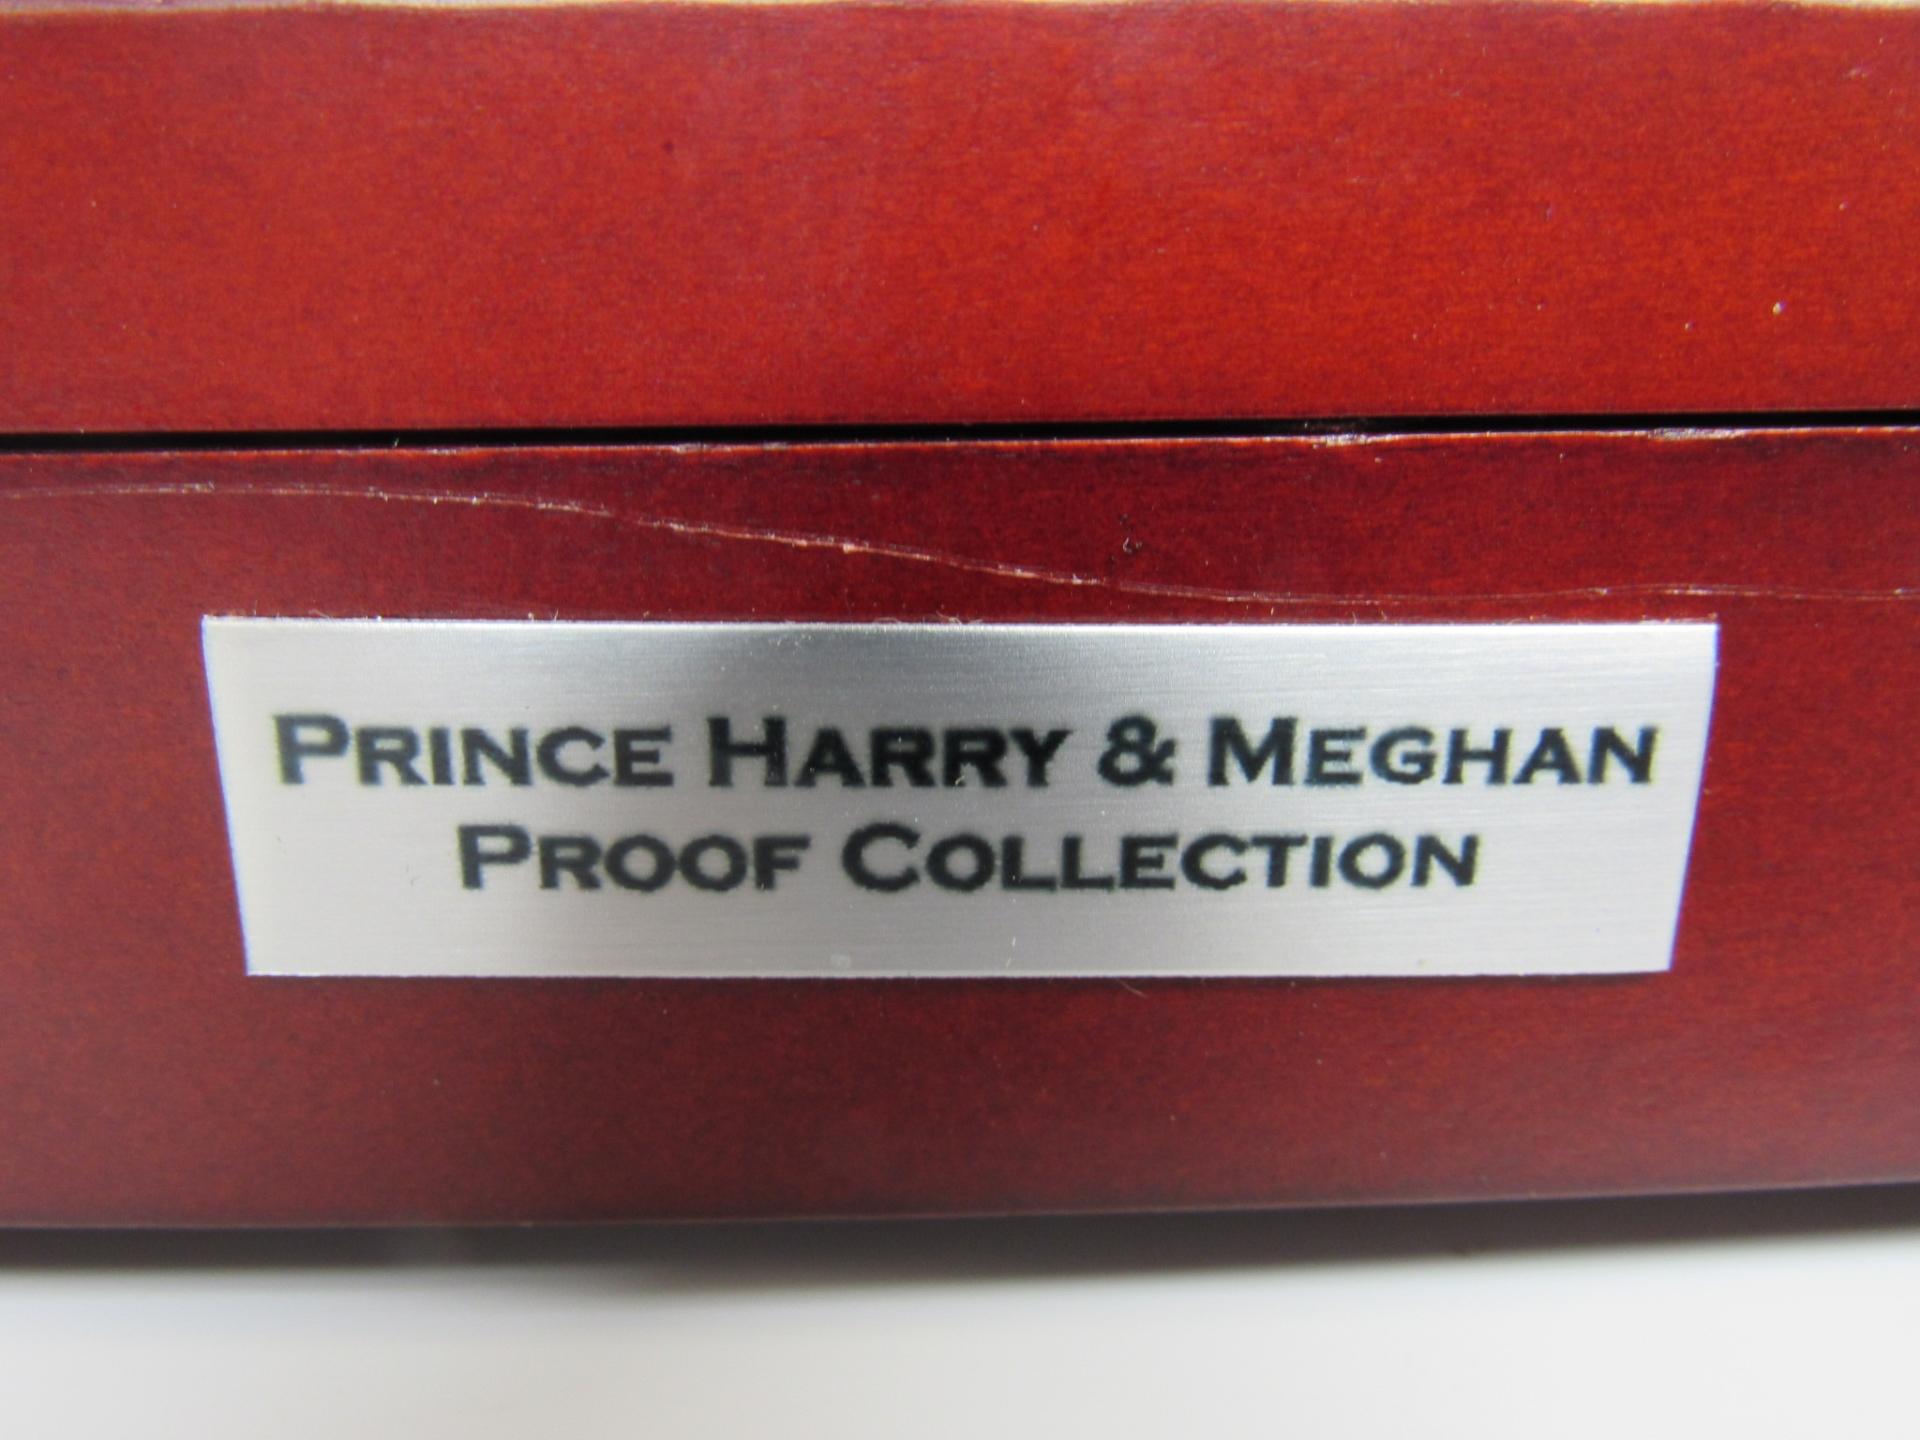 Prince Harry & Meghan Proof Collection